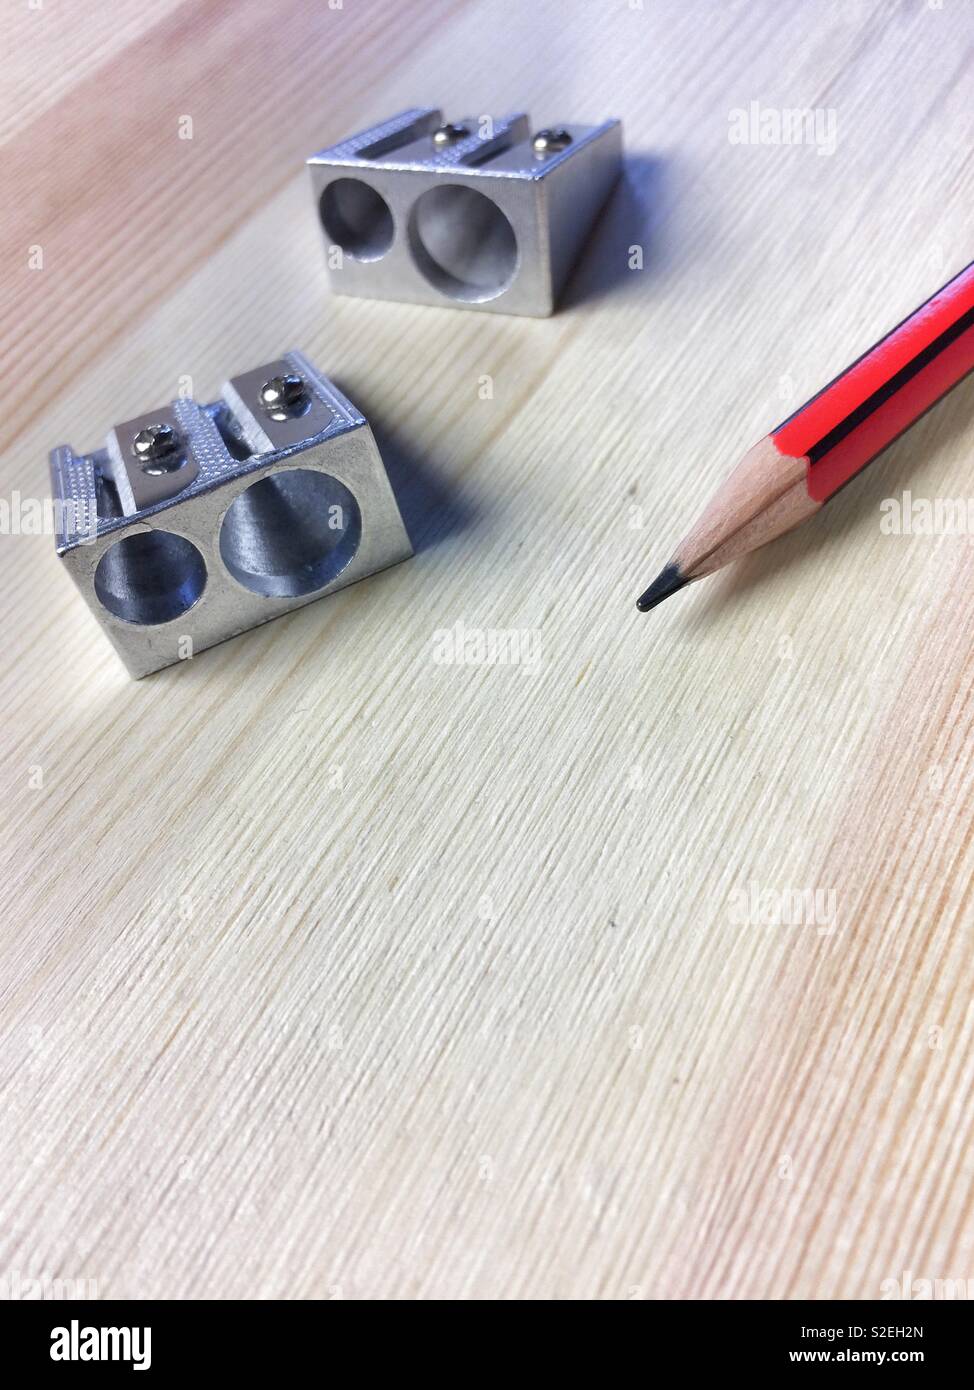 Sharpeners and pencil,close up view. Stock Photo